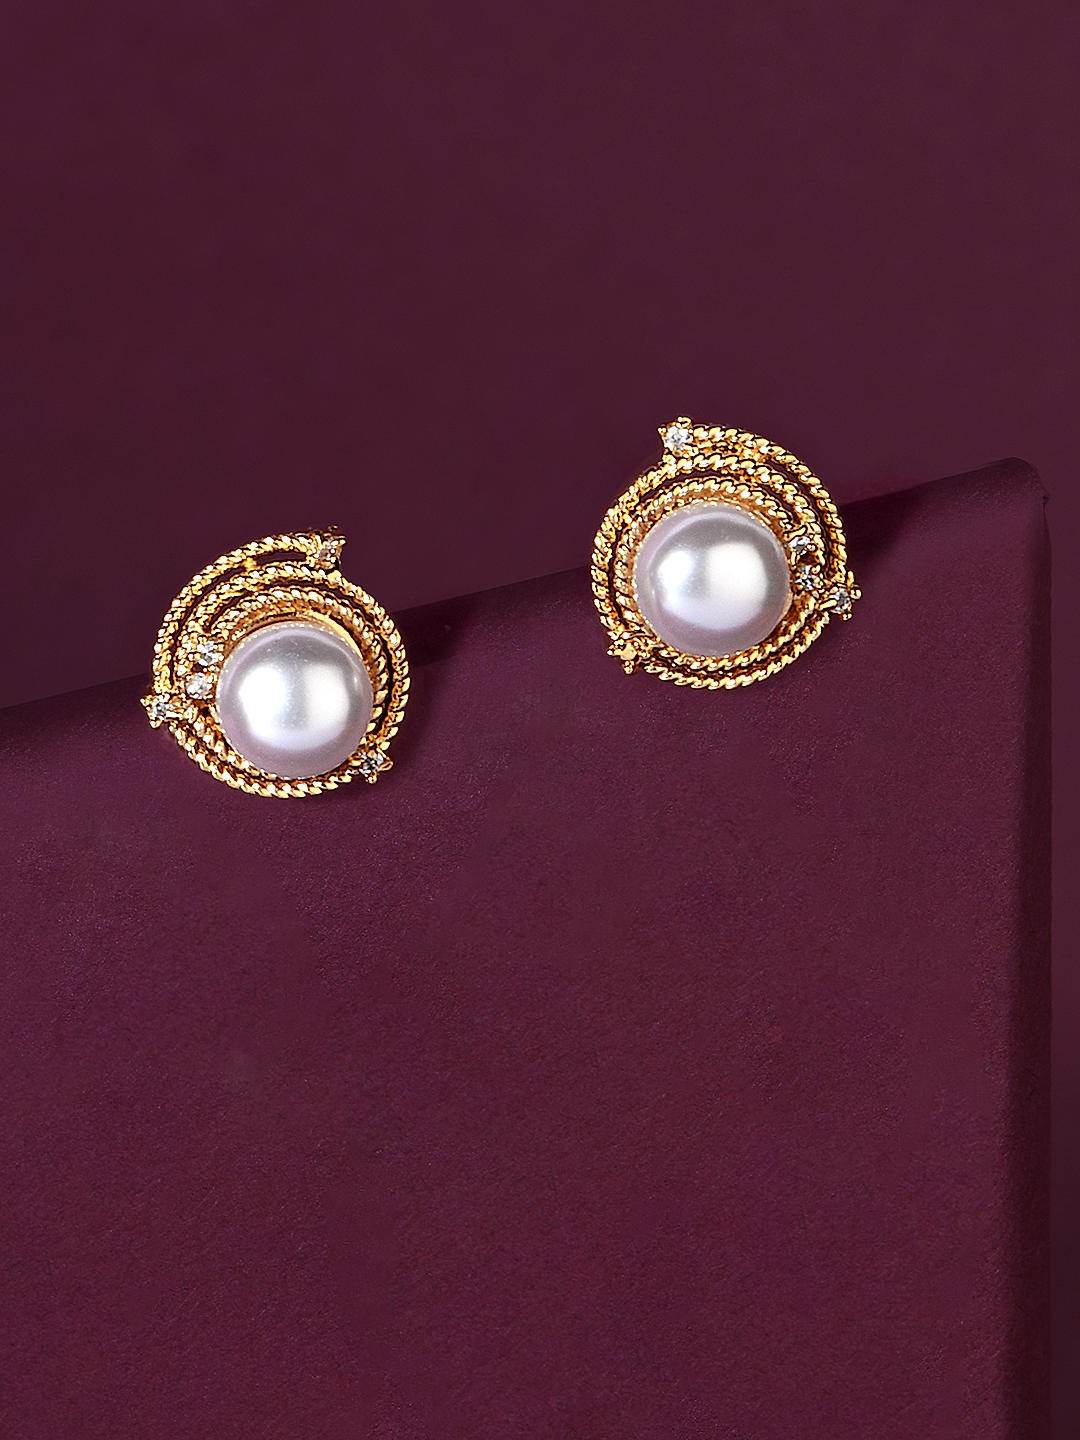 White Pearl Grape Cluster Earrings with Freshwater Pearls and Diamonds –  Chris Chaney